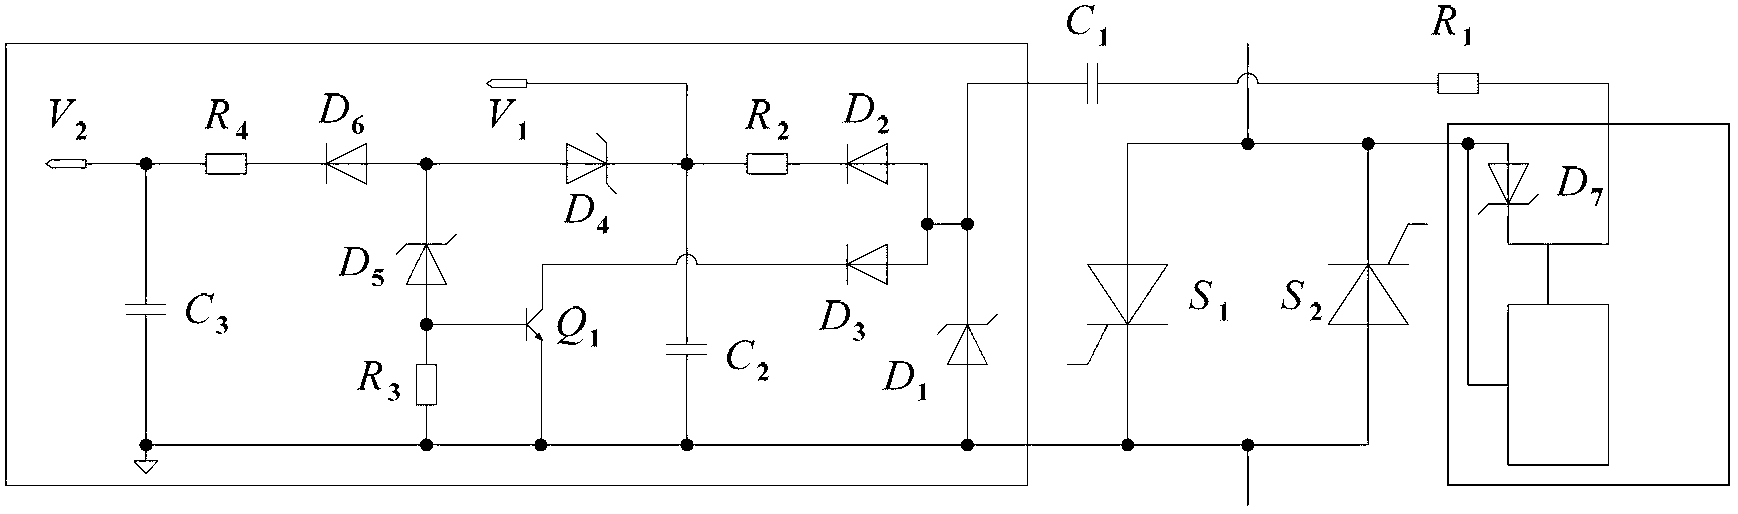 A triggering system of thyristor switched capacitor valve set